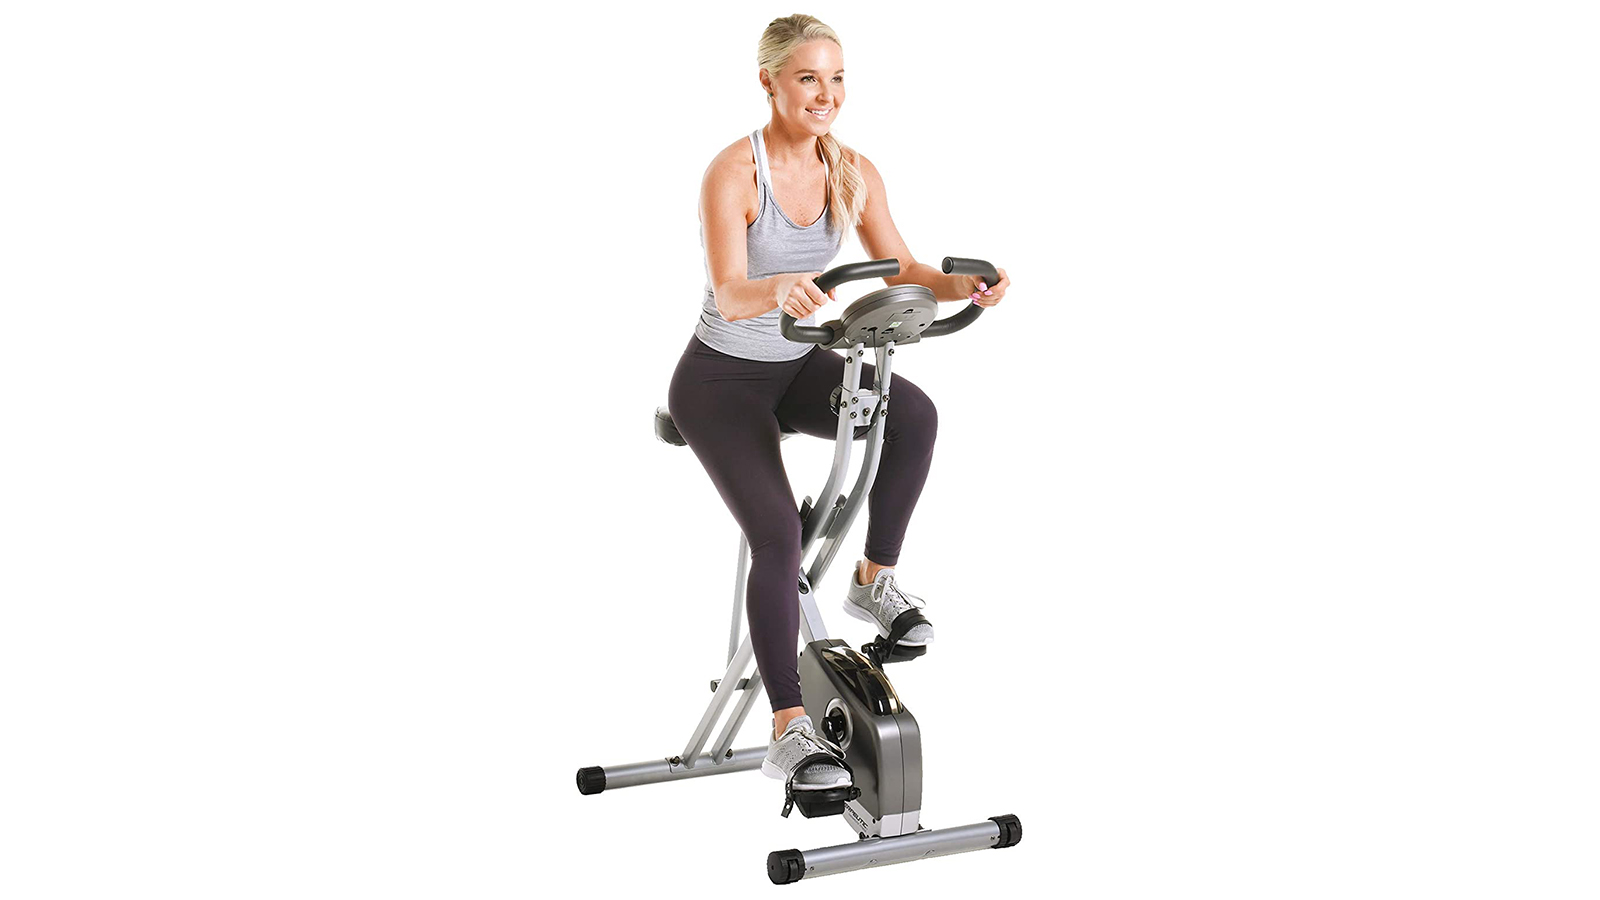 Exerpeutic Folding Magnetic Upright Exercise Bike Pulse Compact Indoor Gym US 